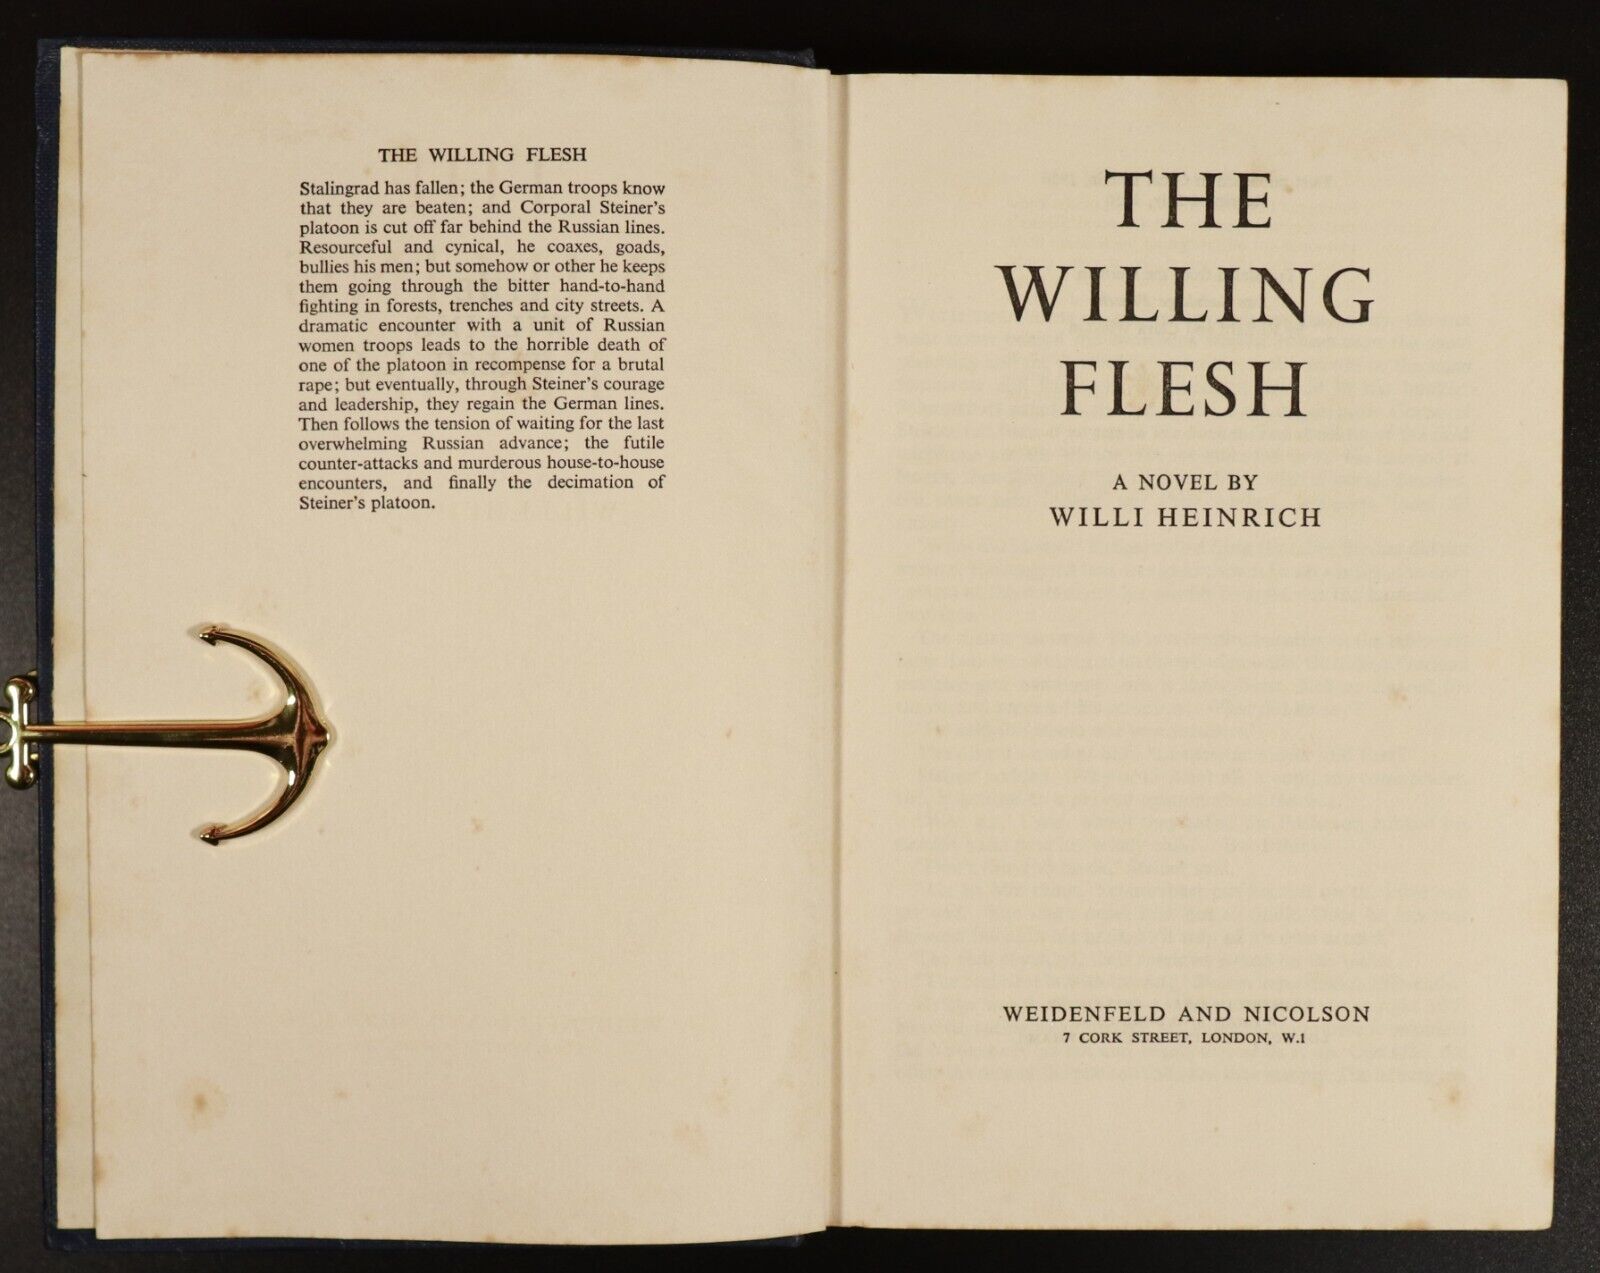 1956 The Willing Flesh by Willi Heinrich Vintage Military Fiction Book - 0